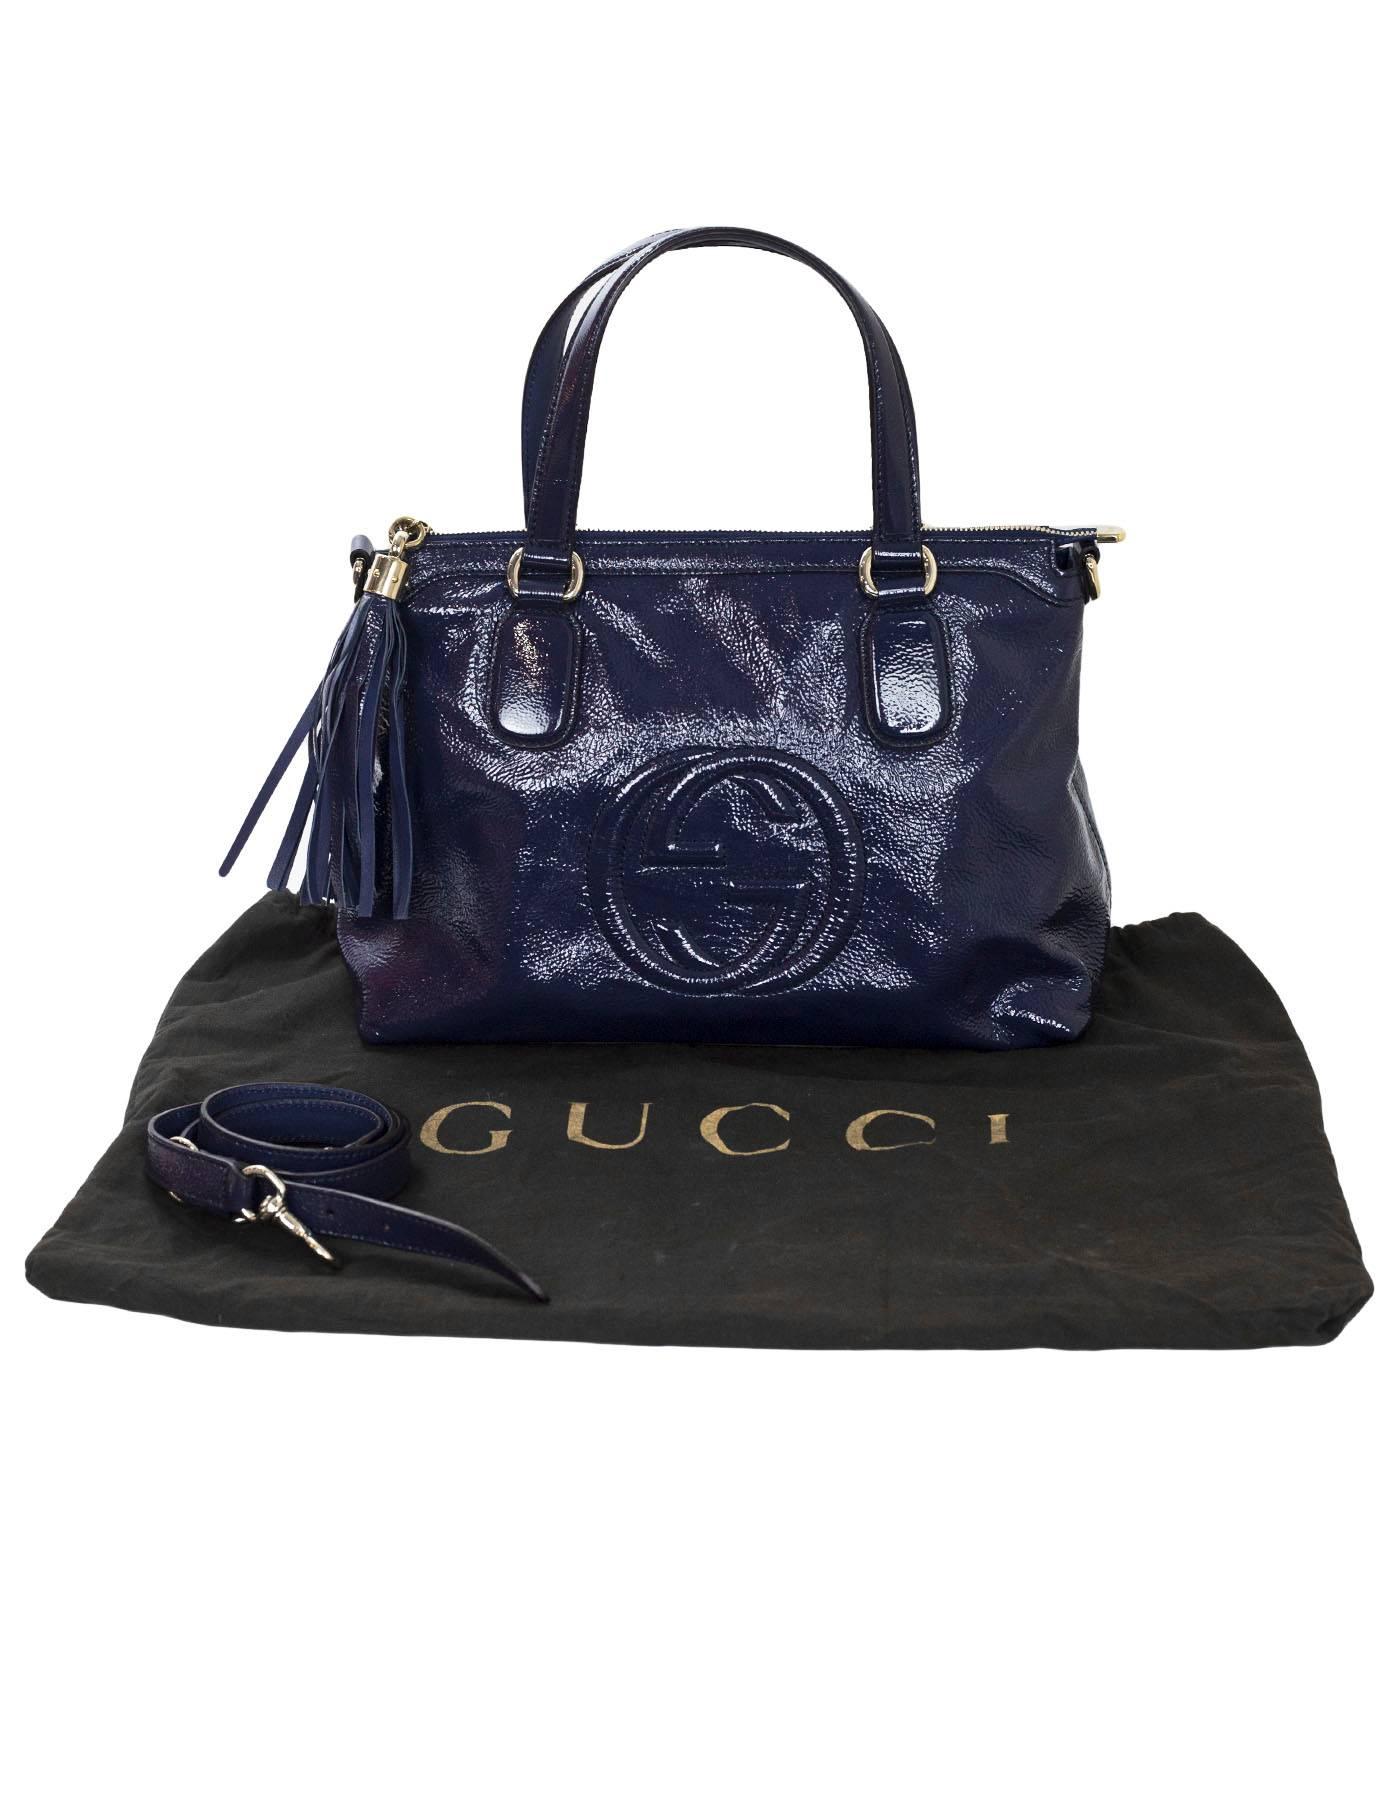 Gucci Navy Soft Patent Leather Soho Satchel Bag with Strap 5